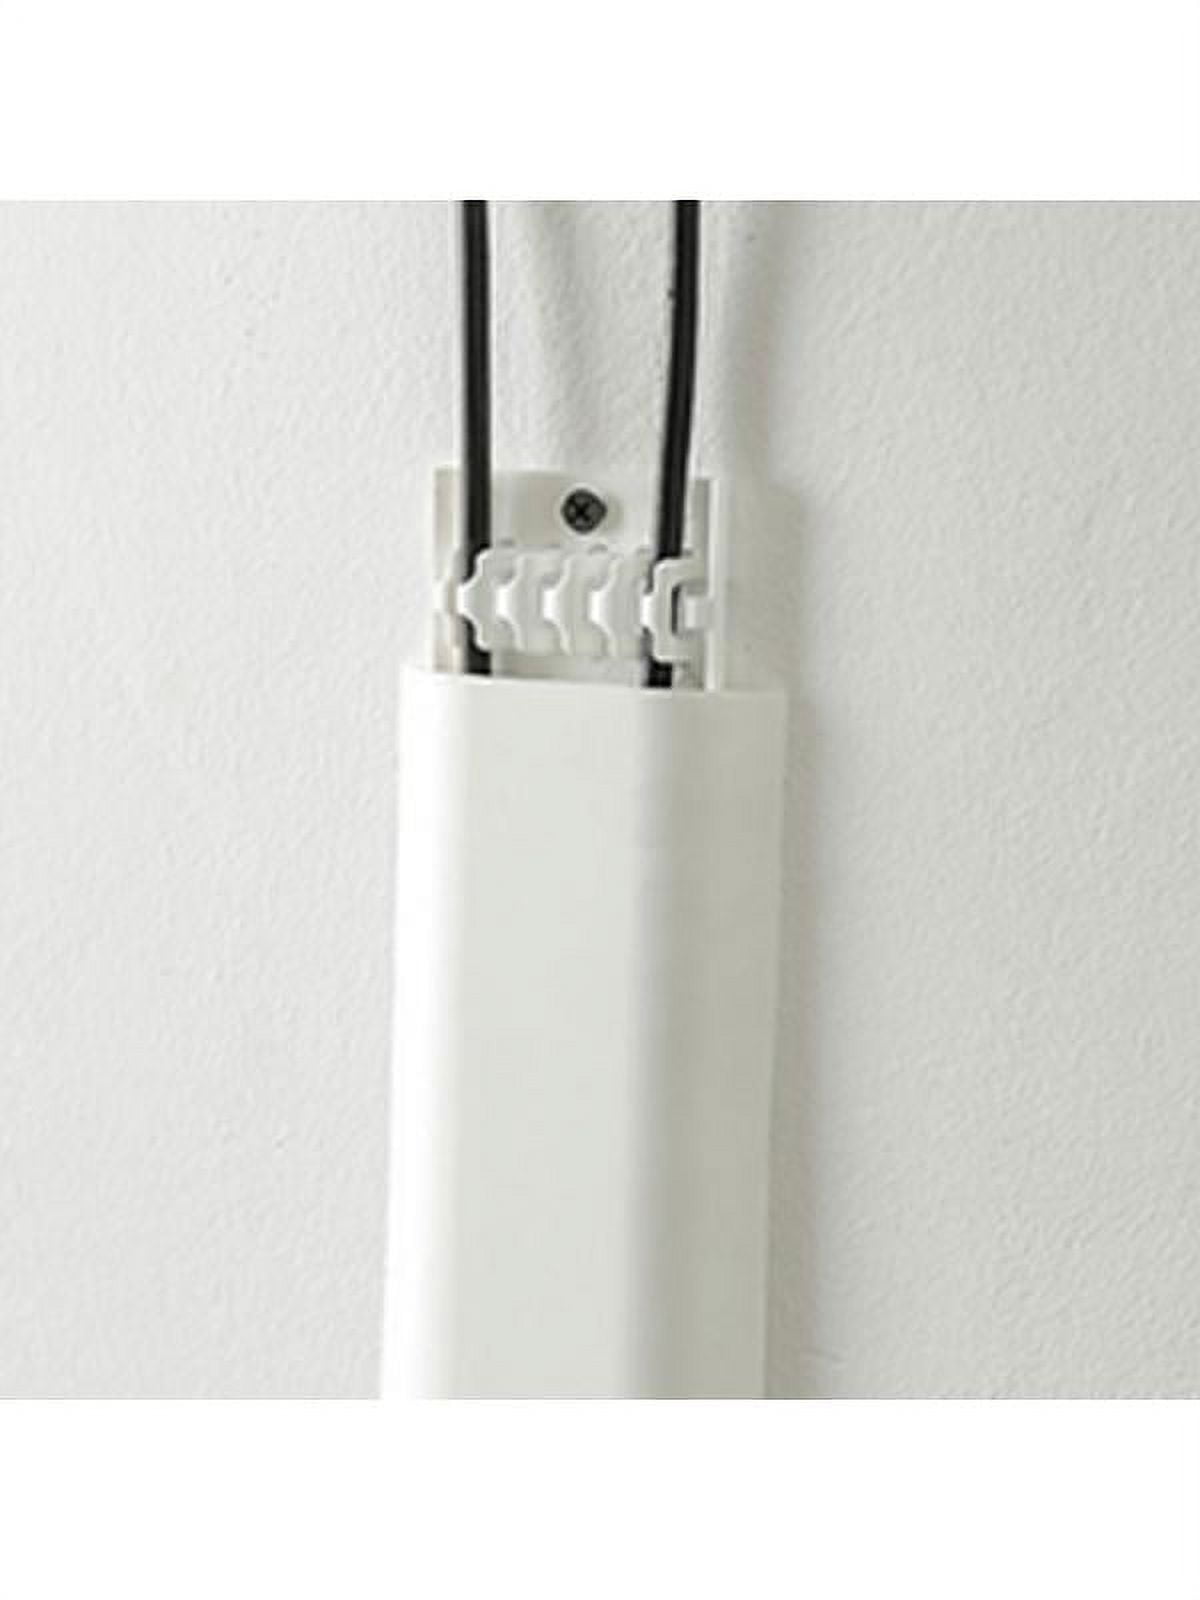 157 Cable Cover Kit - Cord Hider For Wall Mounts- Paintable Cable Concealer  For Wall Mounted Tv-wire Hider Cord Management System- White Wire Concealer-  10x15.7 (10 Pack), 0.95 Wide X 0.55 High